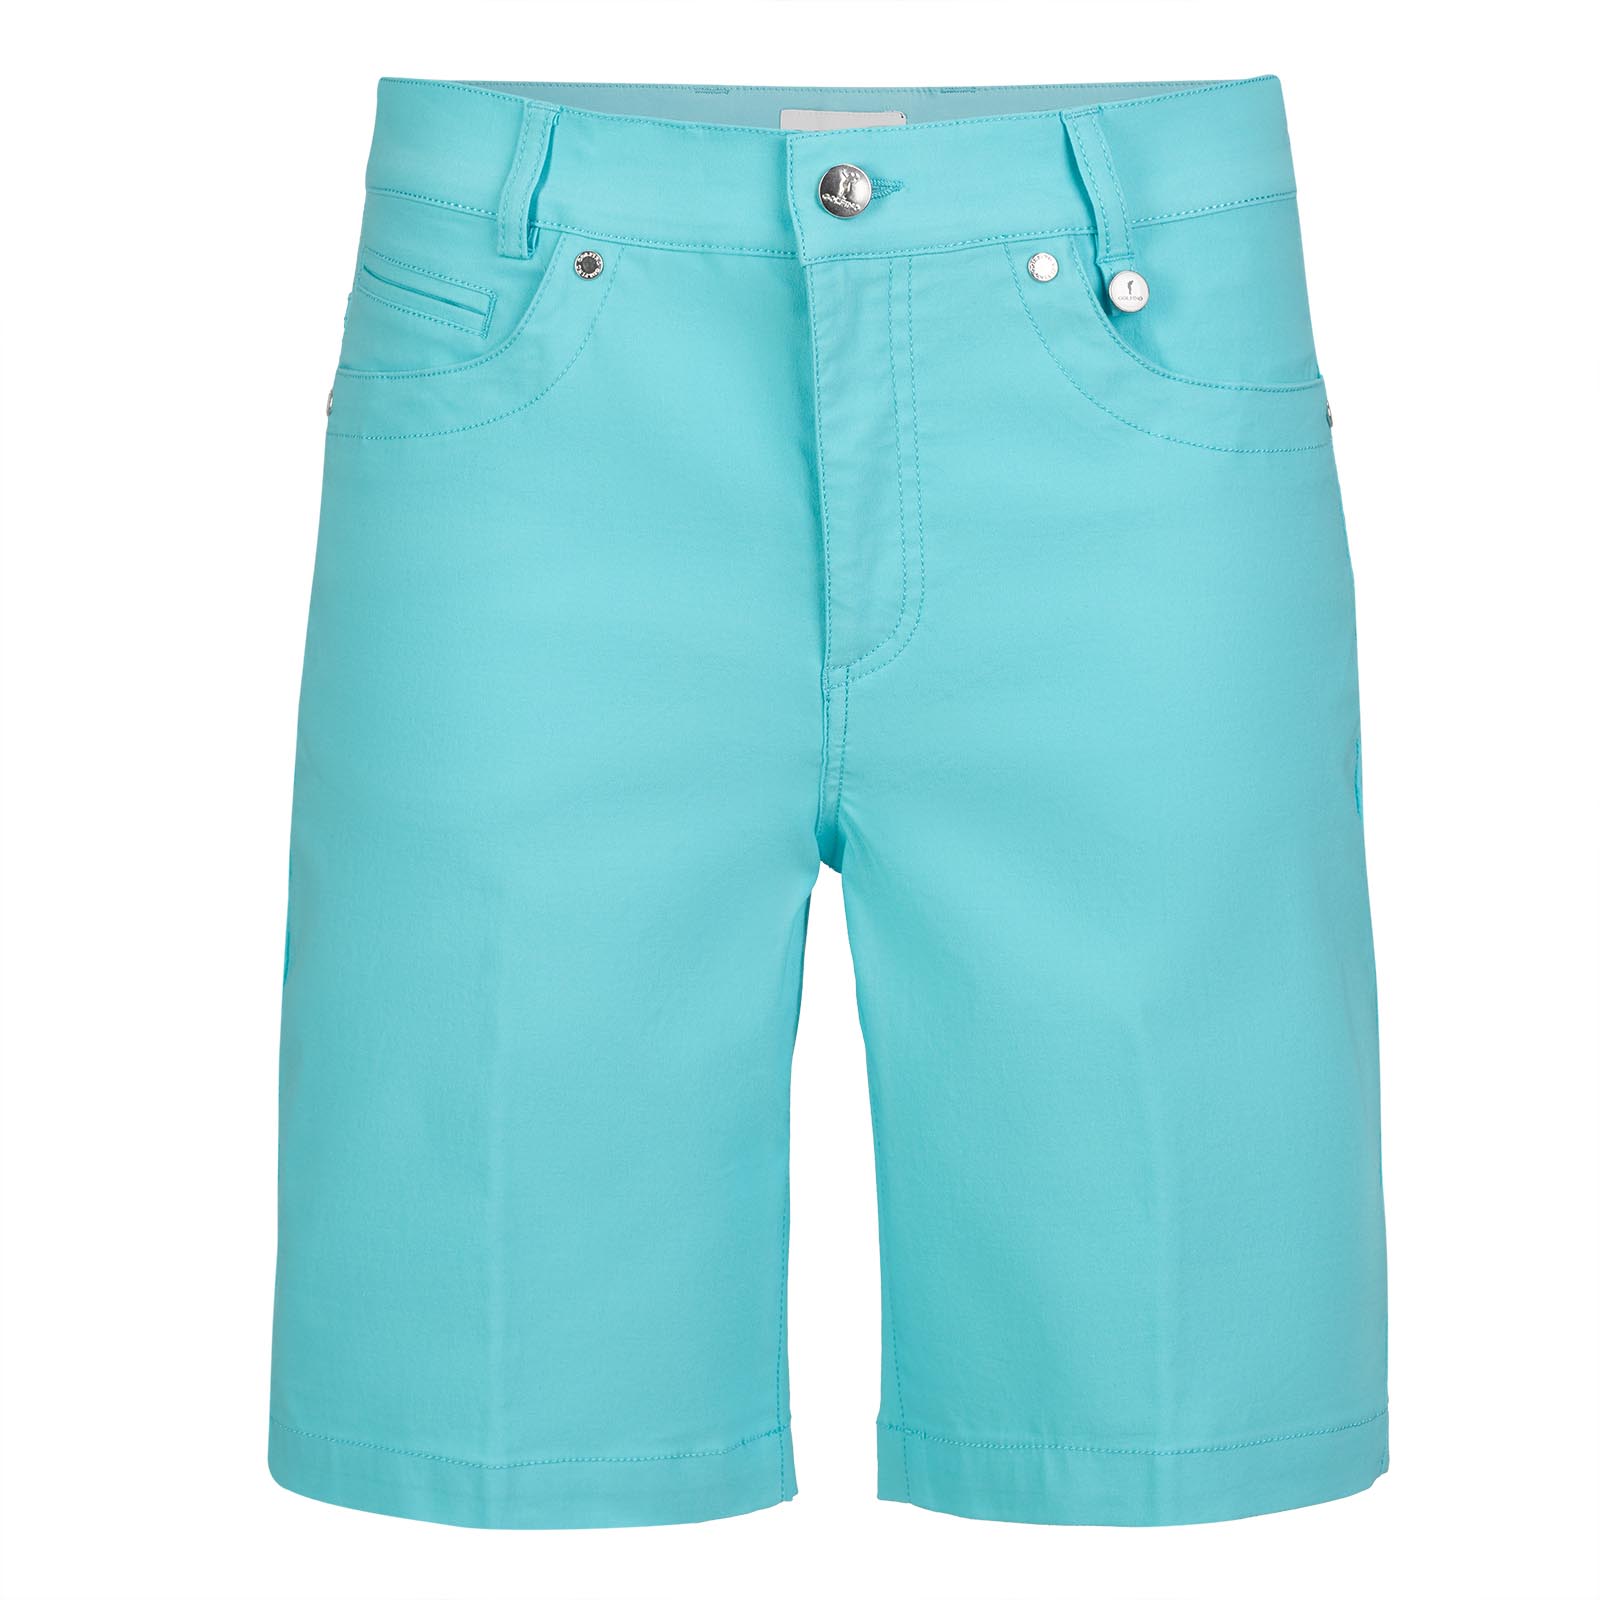 Ladies' Golf short "The Sofia" made from Light Techno Stretch material in slim fit